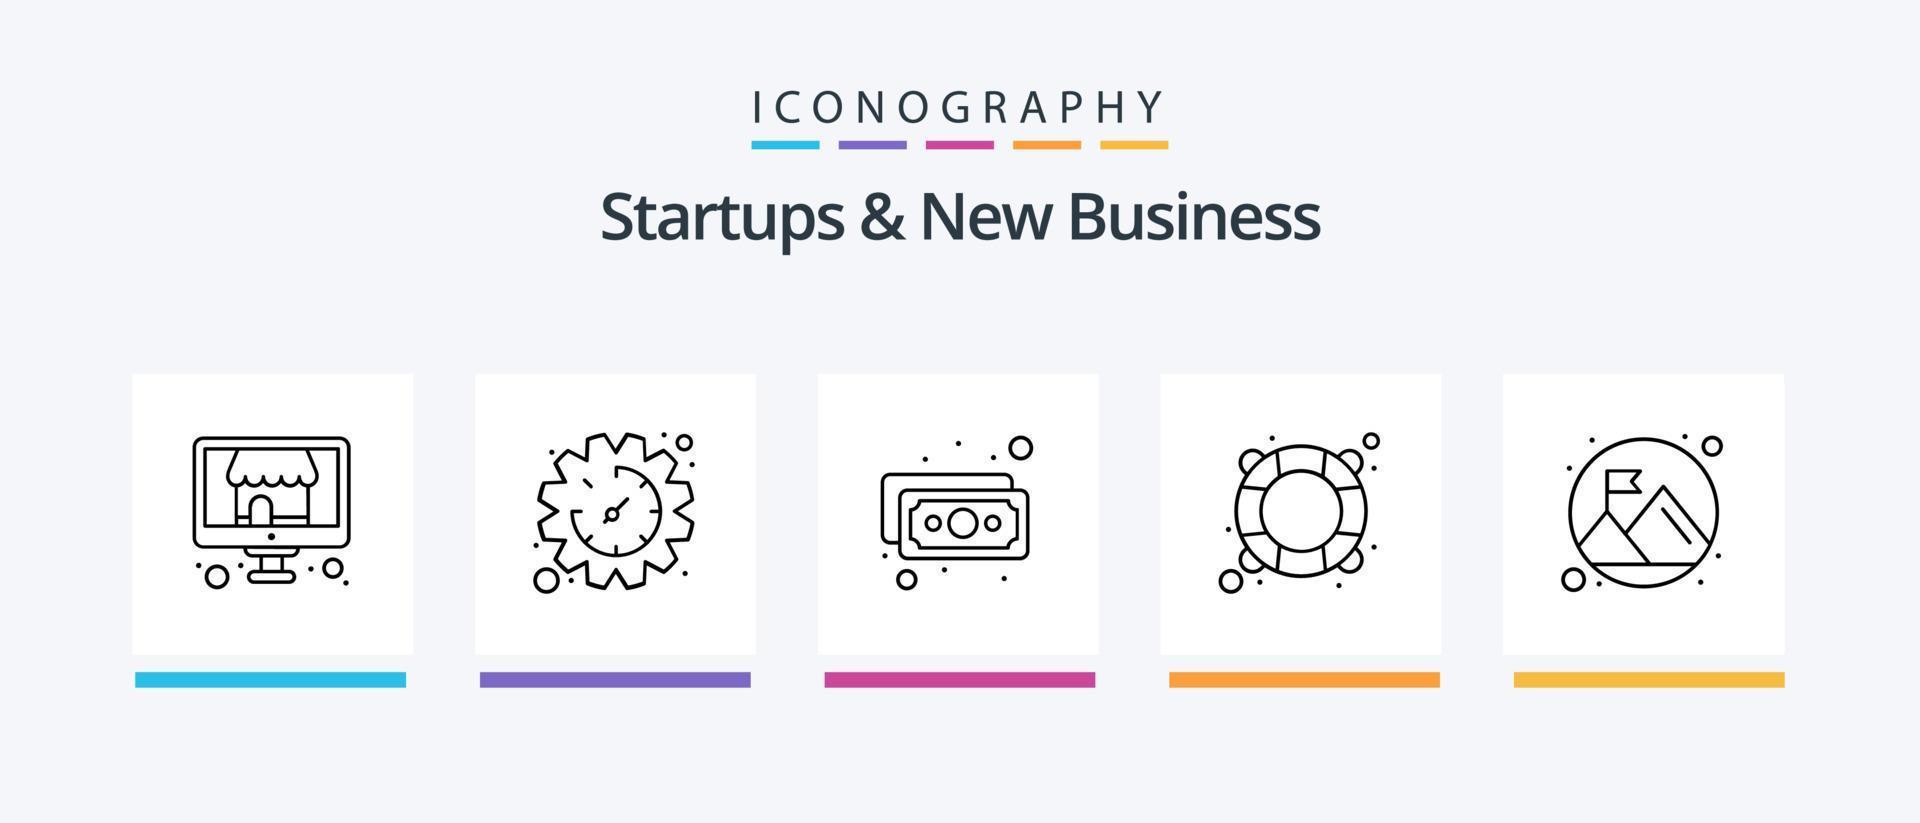 Startups And New Business Line 5 Icon Pack Including grow. currency. content. cash. building. Creative Icons Design vector